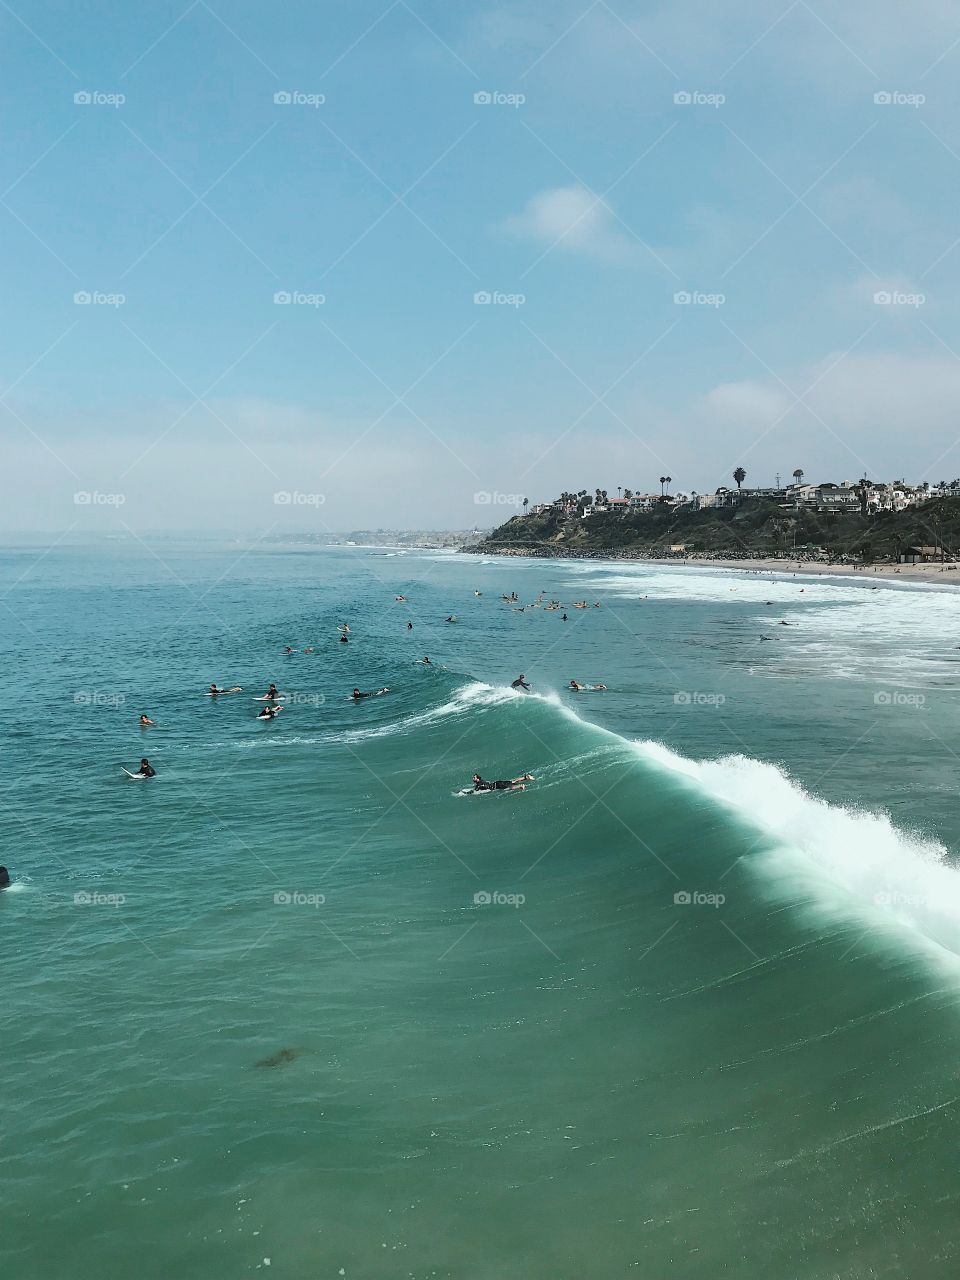 Beautiful afternoon at the beach watching the surfers catch some sweet waves on the west coast. 